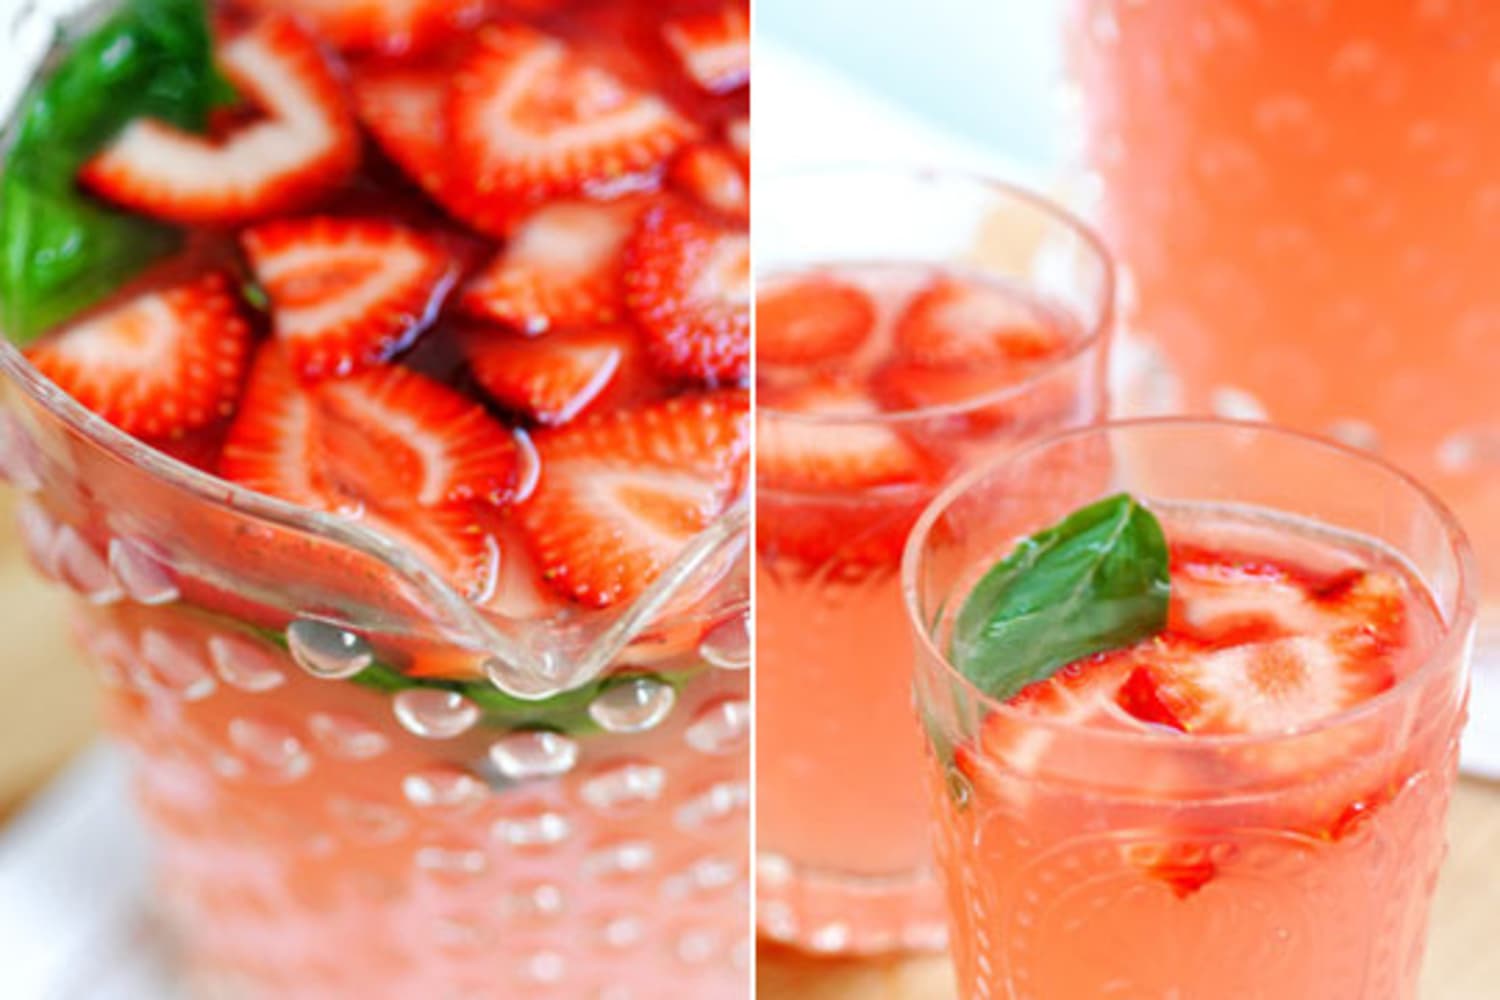 This 4-Ingredient Strawberry Margarita Comes in a Pitcher. Could It Be